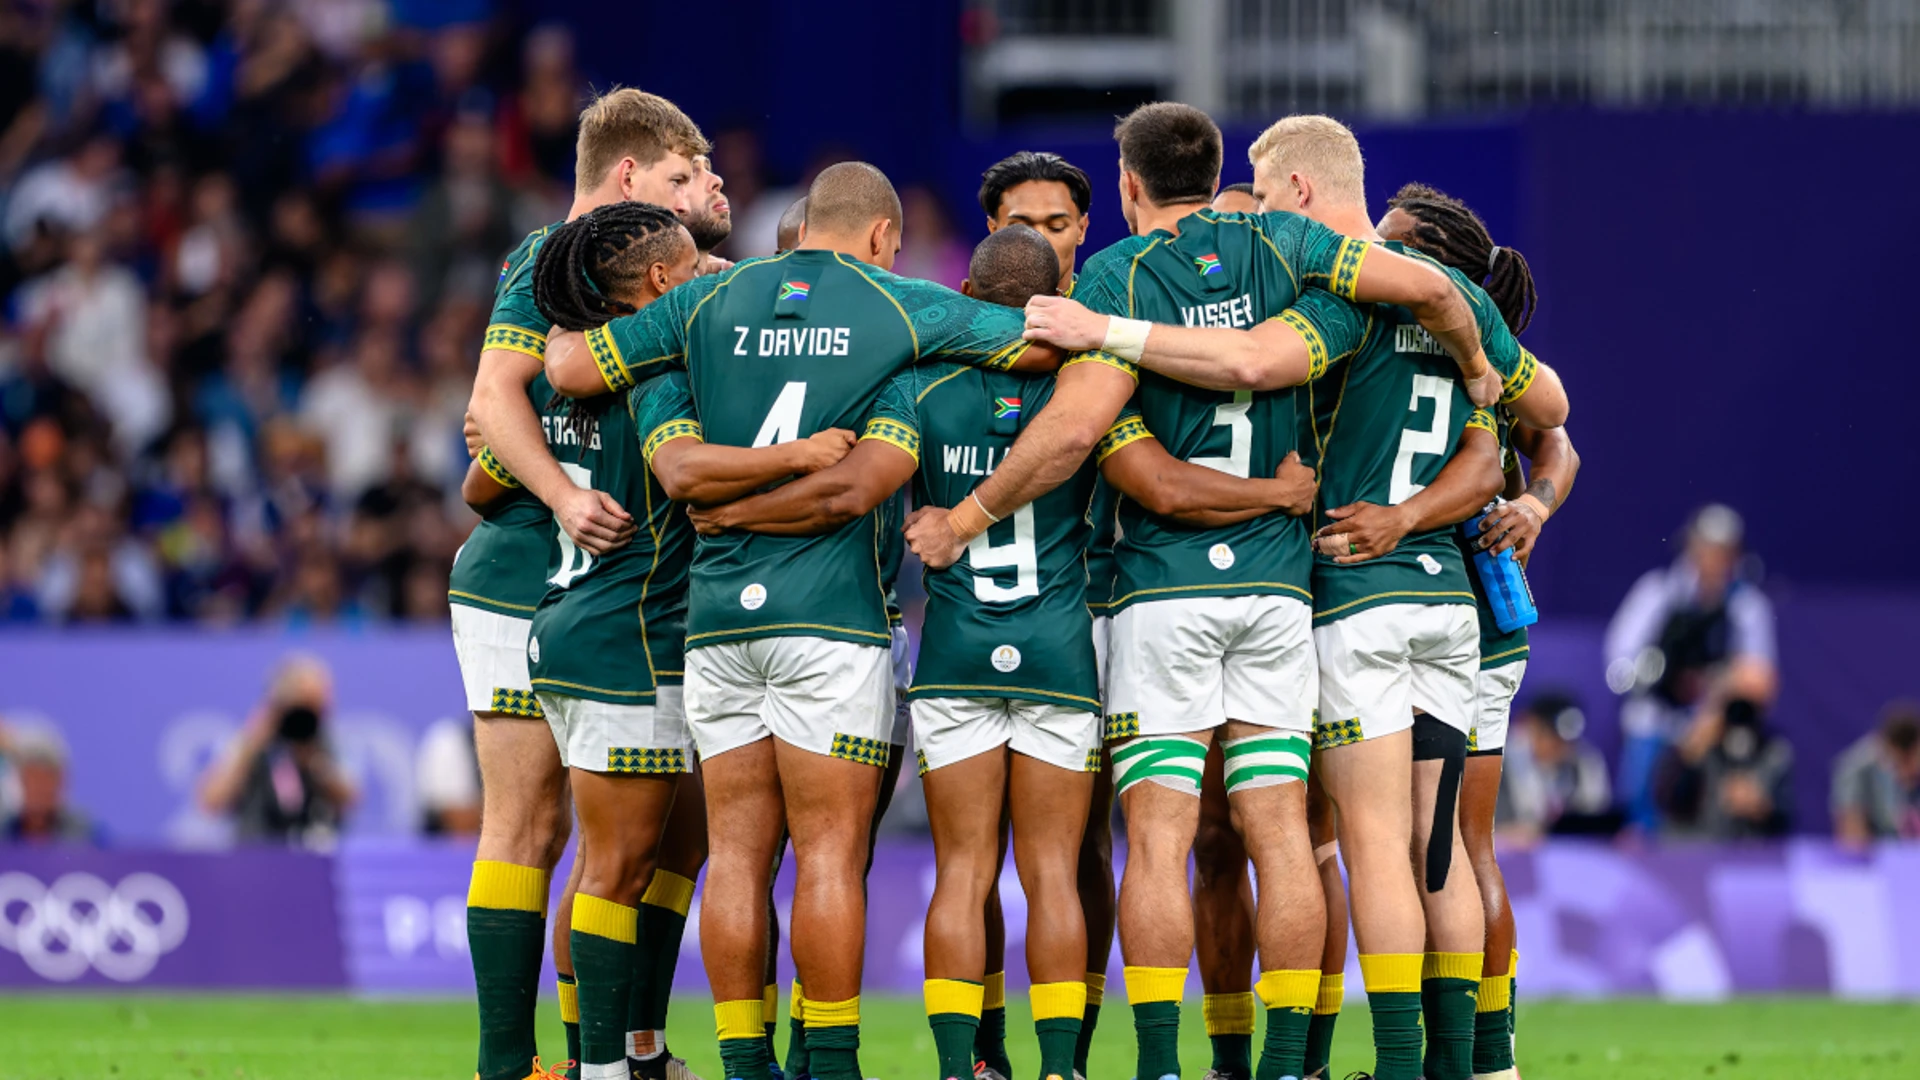 Hatred and revenge: The Stade de France combination the Blitzboks need to overcome